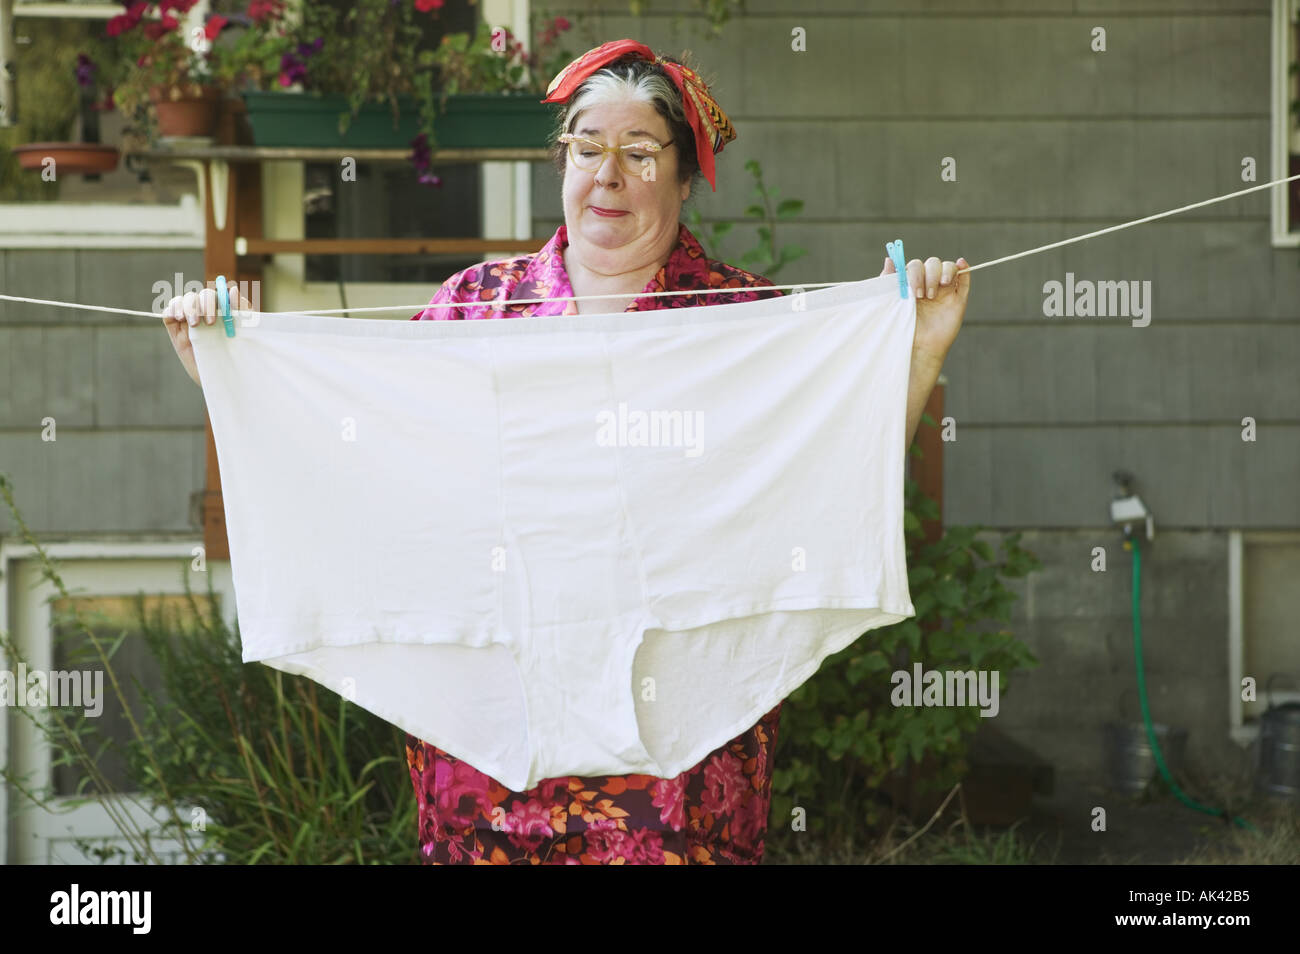 Woman hanging oversized underwear on a clothesline Stock Photo